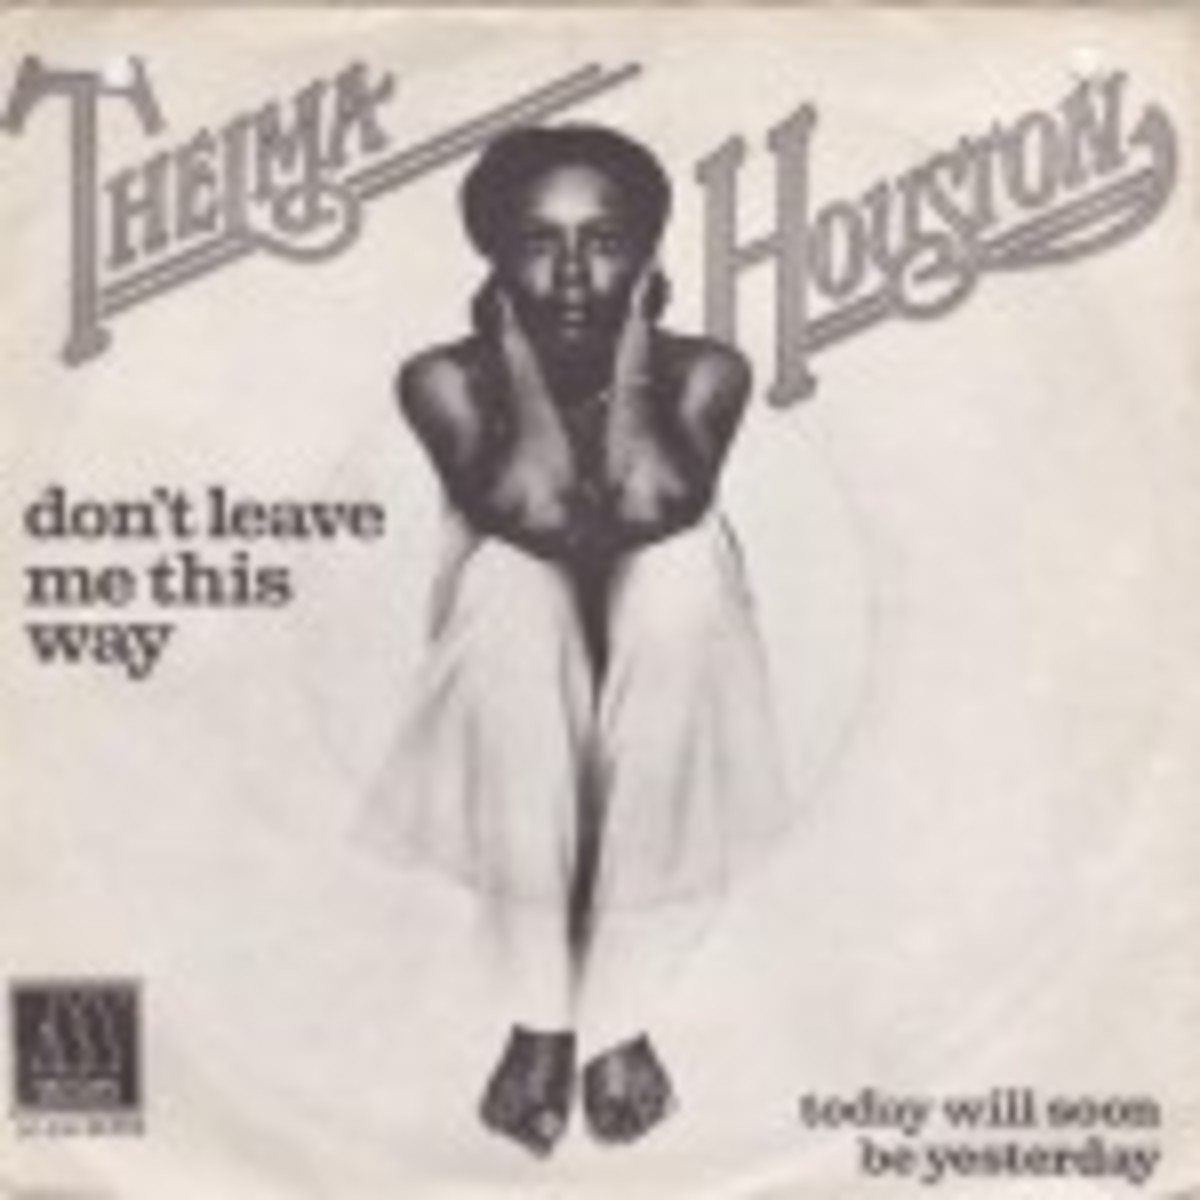 Thelma Houston Don't Leave Me This Way